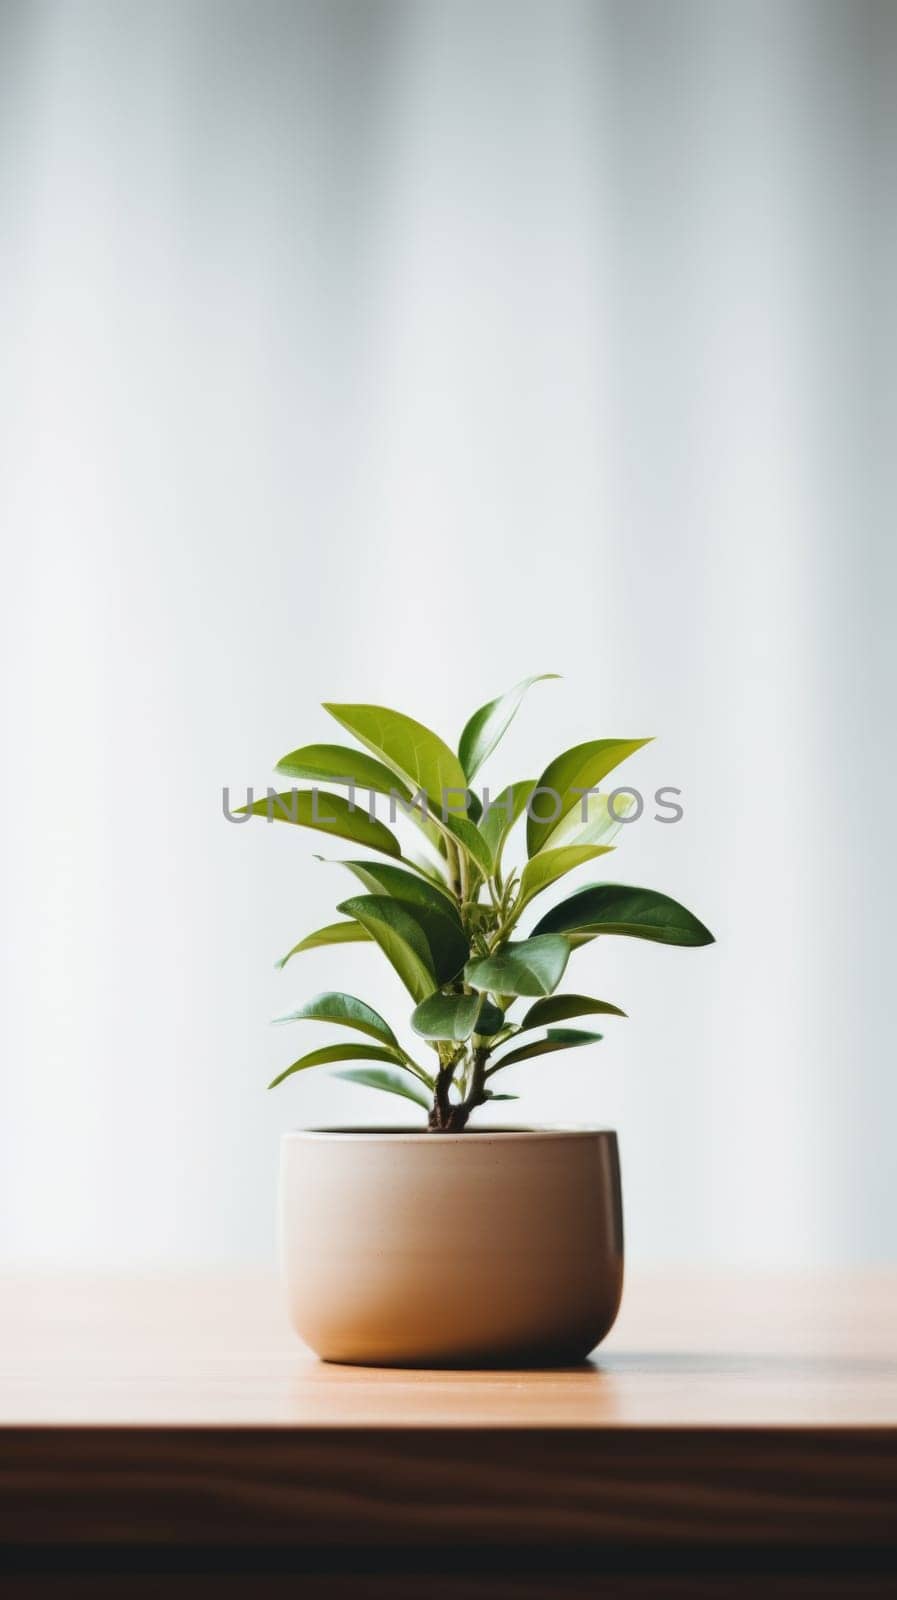 A small plant in a ceramic pot on a table